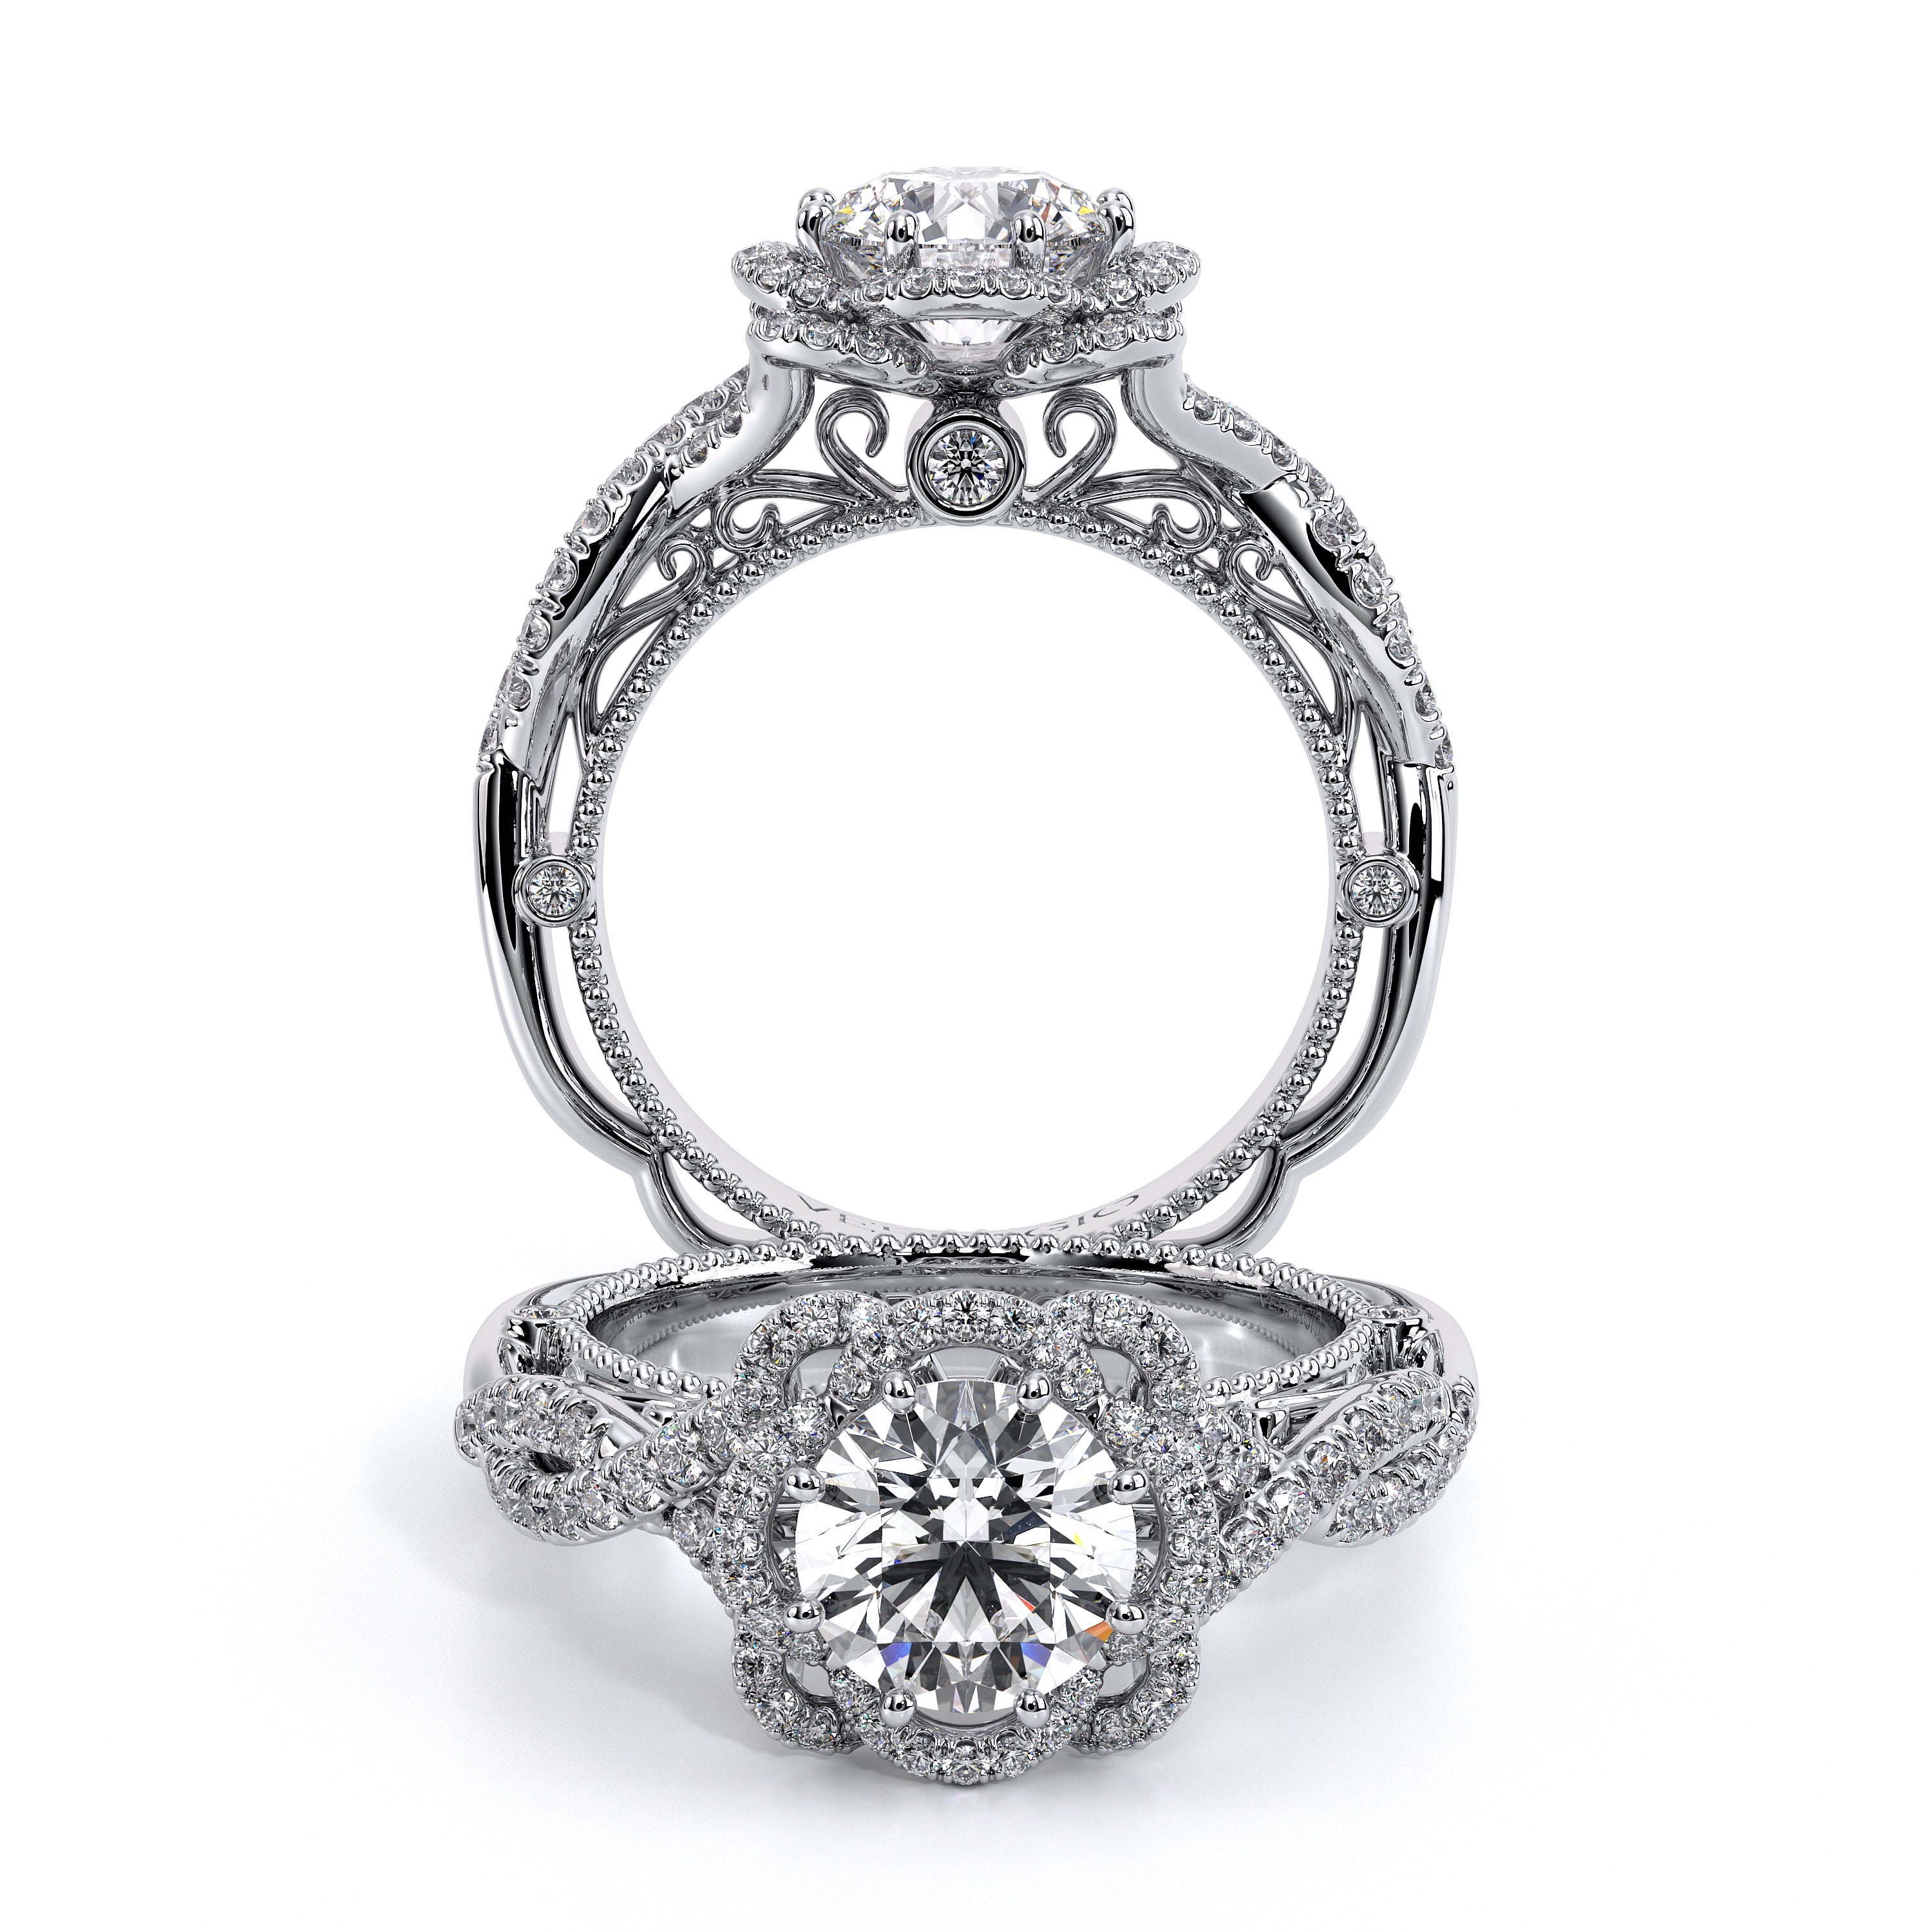 0.50 Ct. SGL Certified Diamond I2/G-H Double Halo Ring in 9K White Gold -  M3867305 - TJC